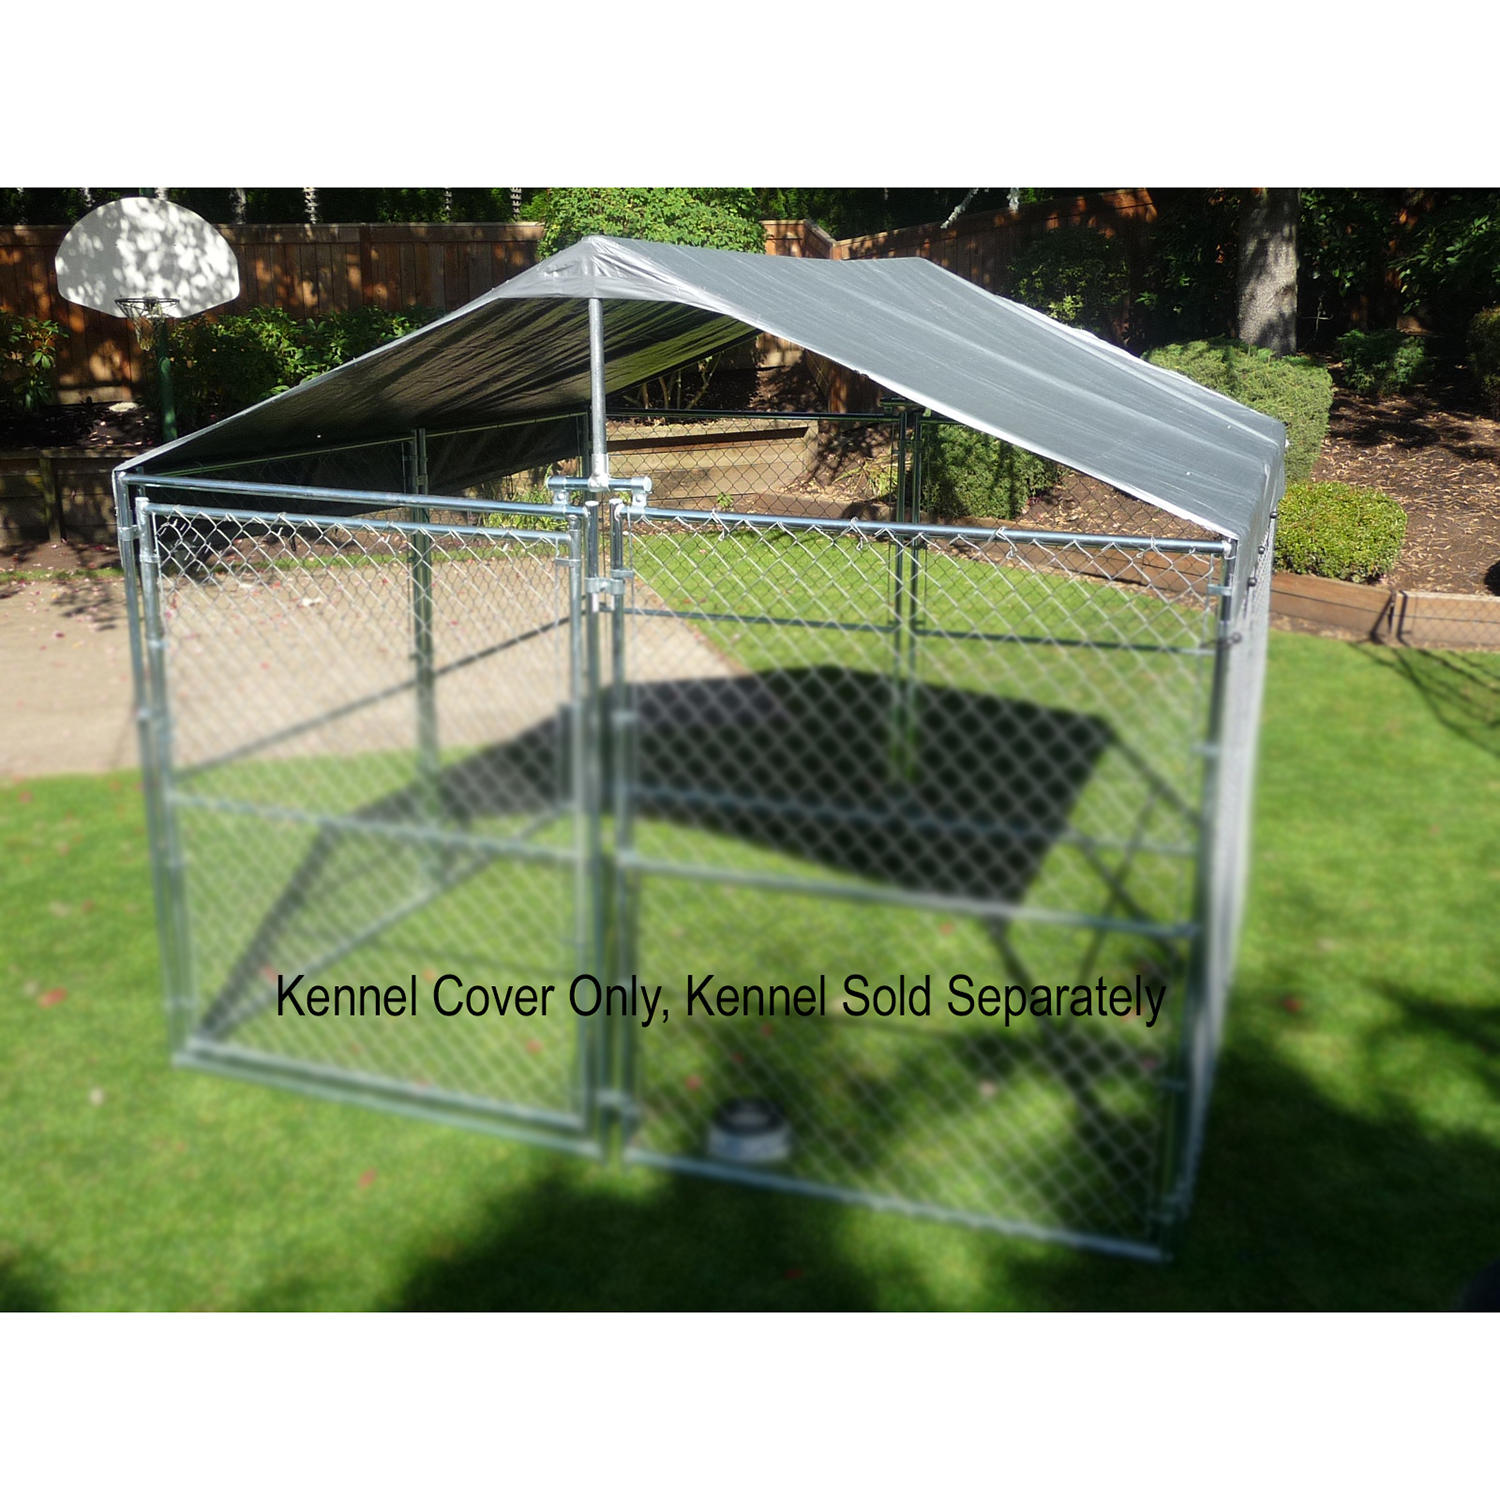 Weatherguard Universal 10'W x 10'L Kennel Cover Plus with Frame